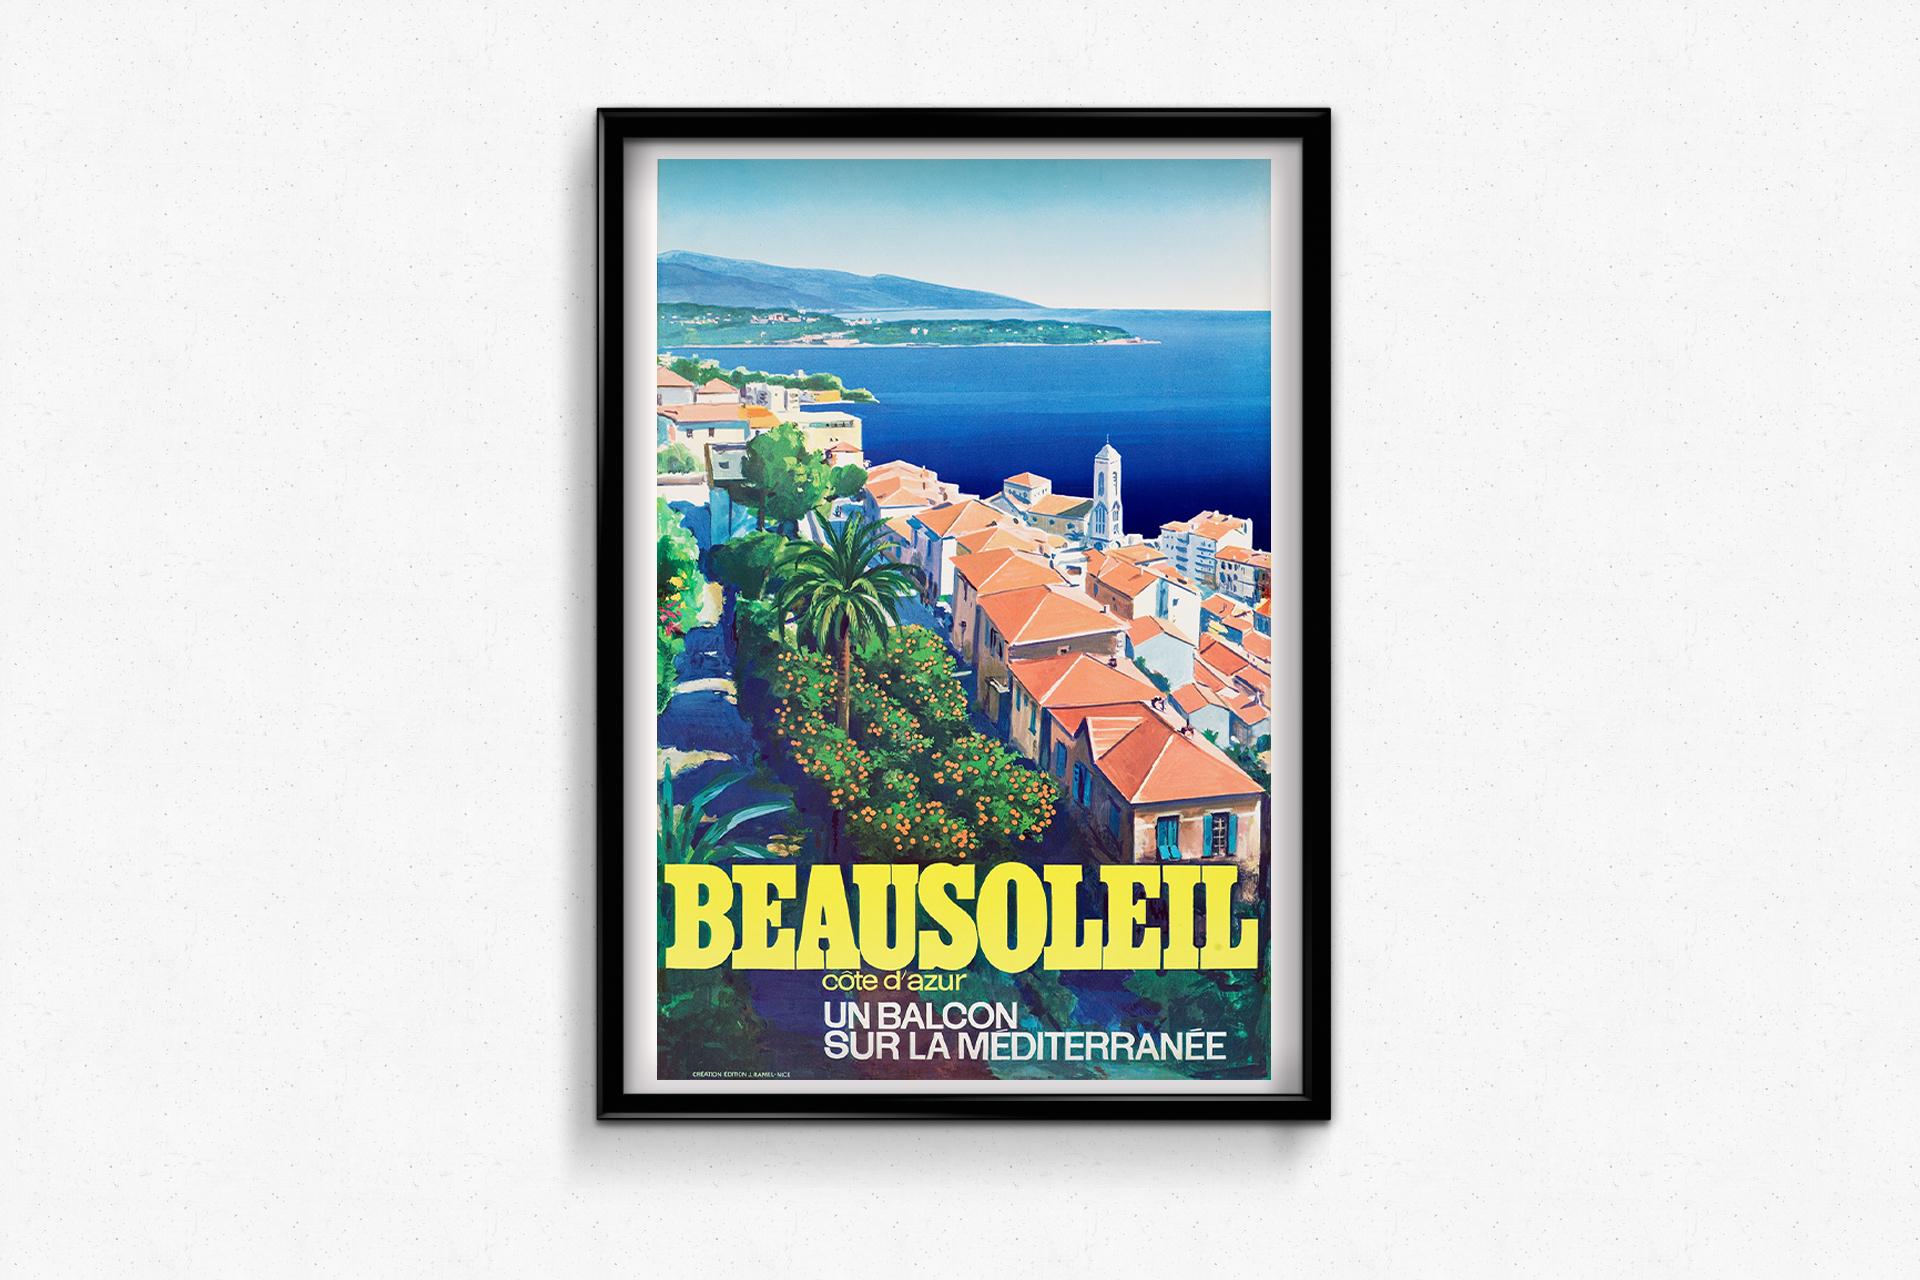 This beautiful advertising poster was made for the city of Beausoleil, we see a sketch of the city, with the Mediterranean Sea in the background and houses and plantations in the foreground.
An ideal vacation or tourism setting for all lovers of the